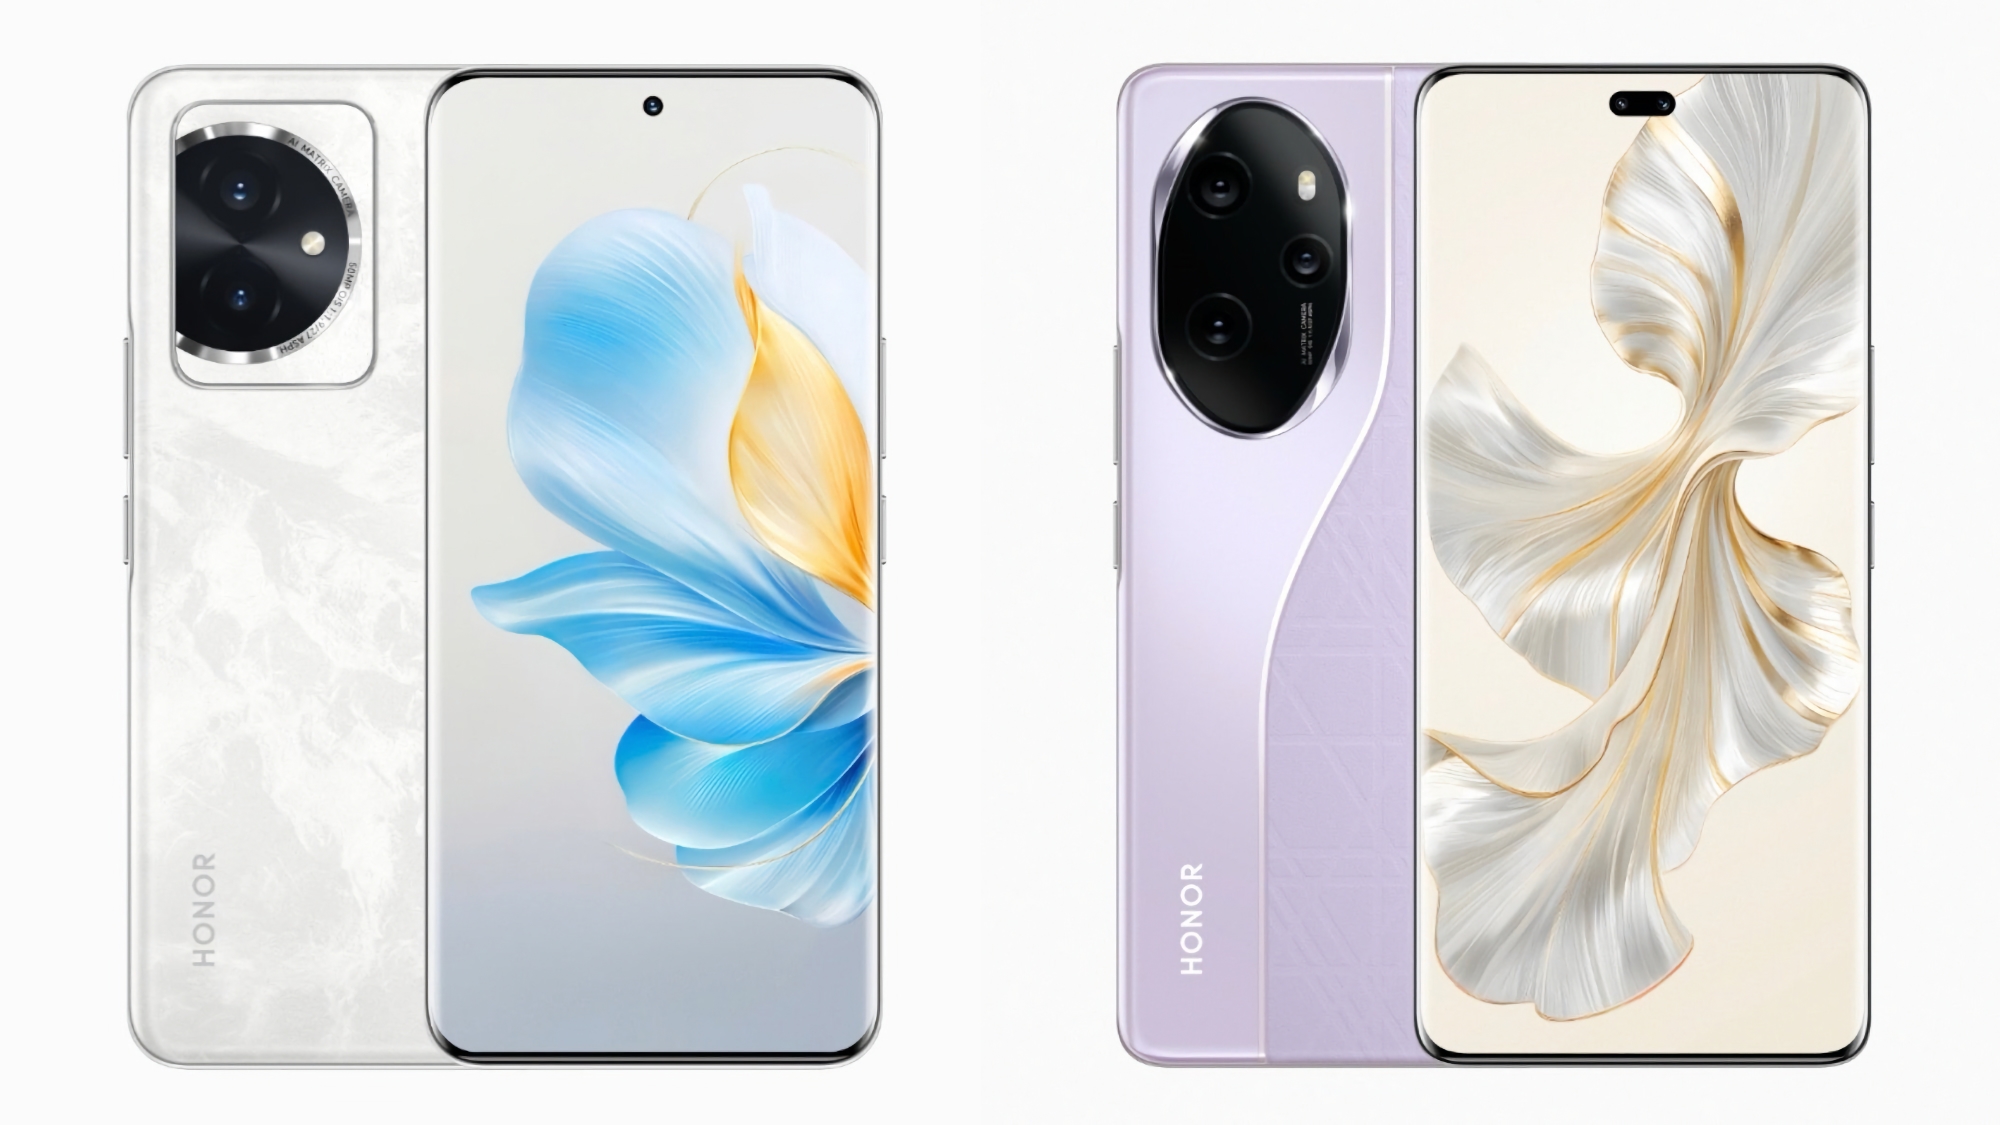 Two colours, curved displays and cameras with unusual design: renders of Honor 100 and Honor 100 Pro have appeared online